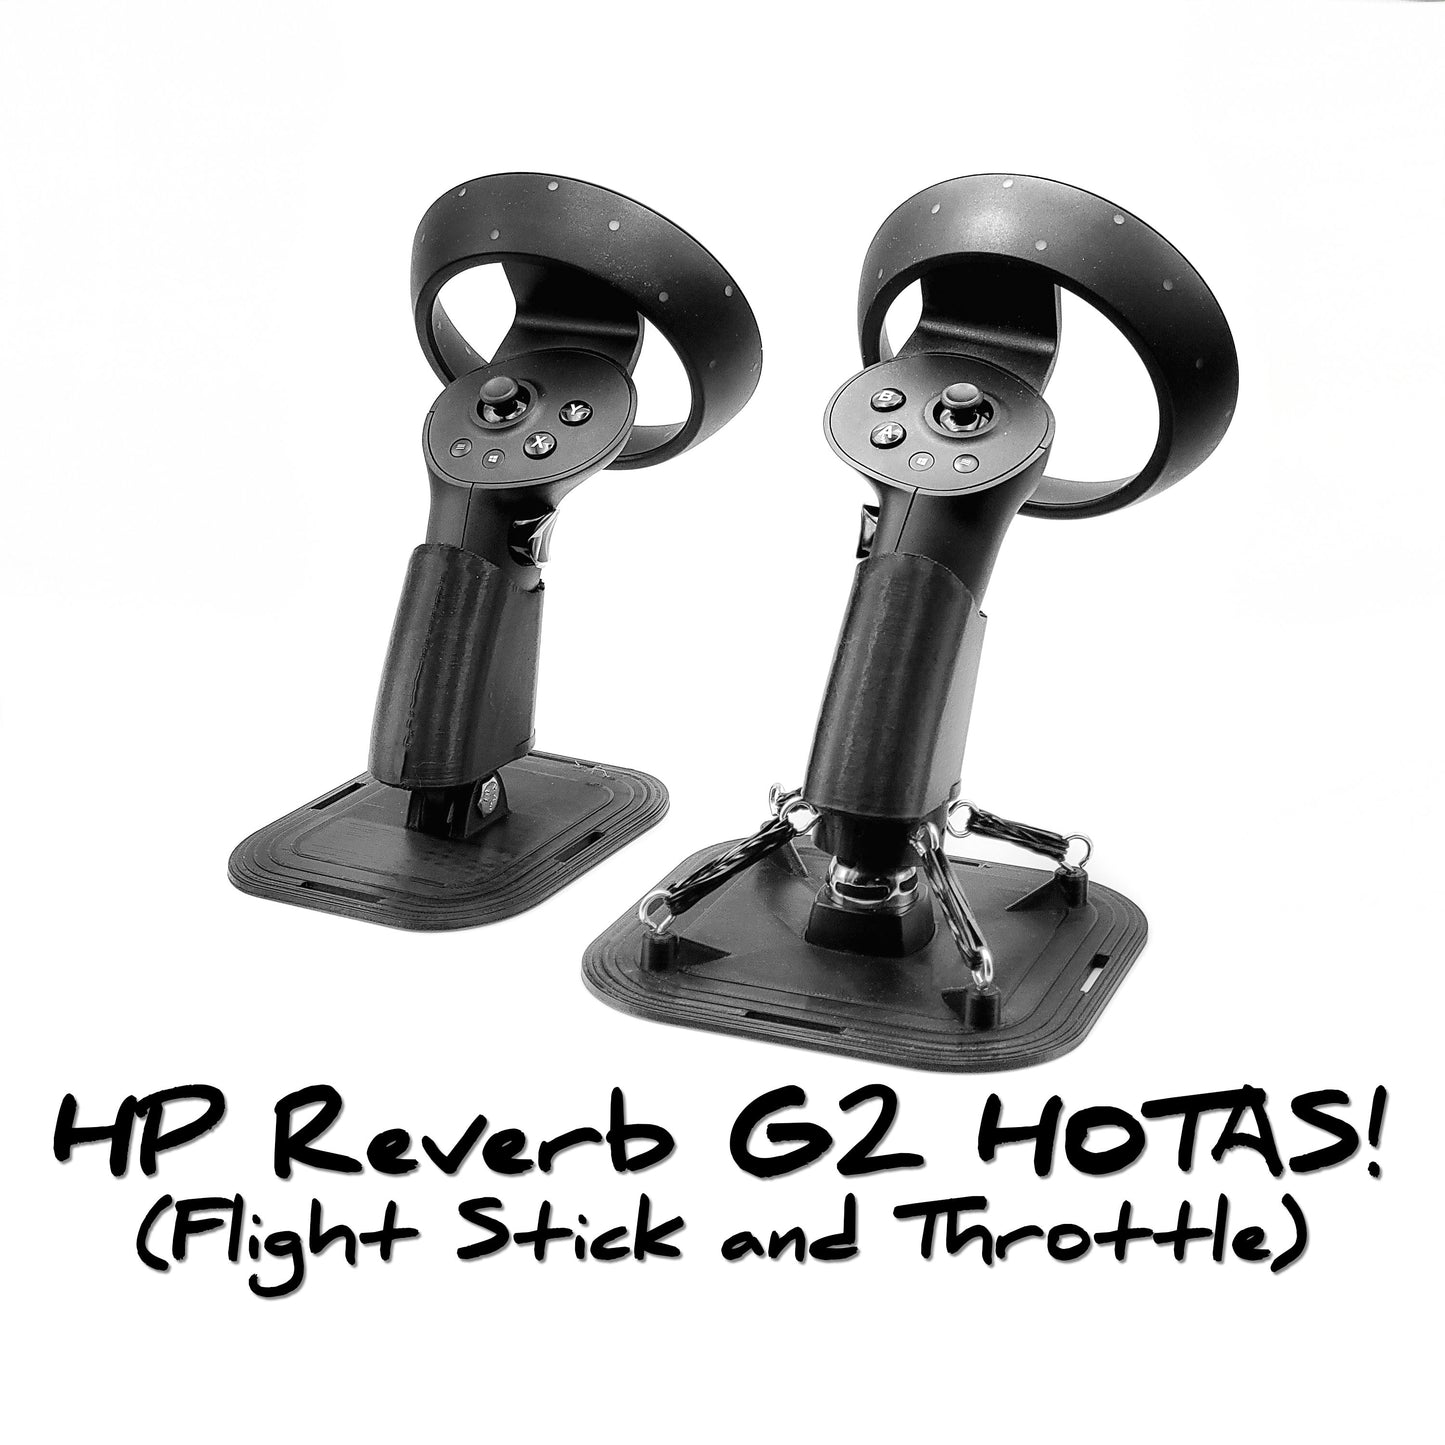 HP Reverb G2 Hotas (Flight Stick System with Throttle)!